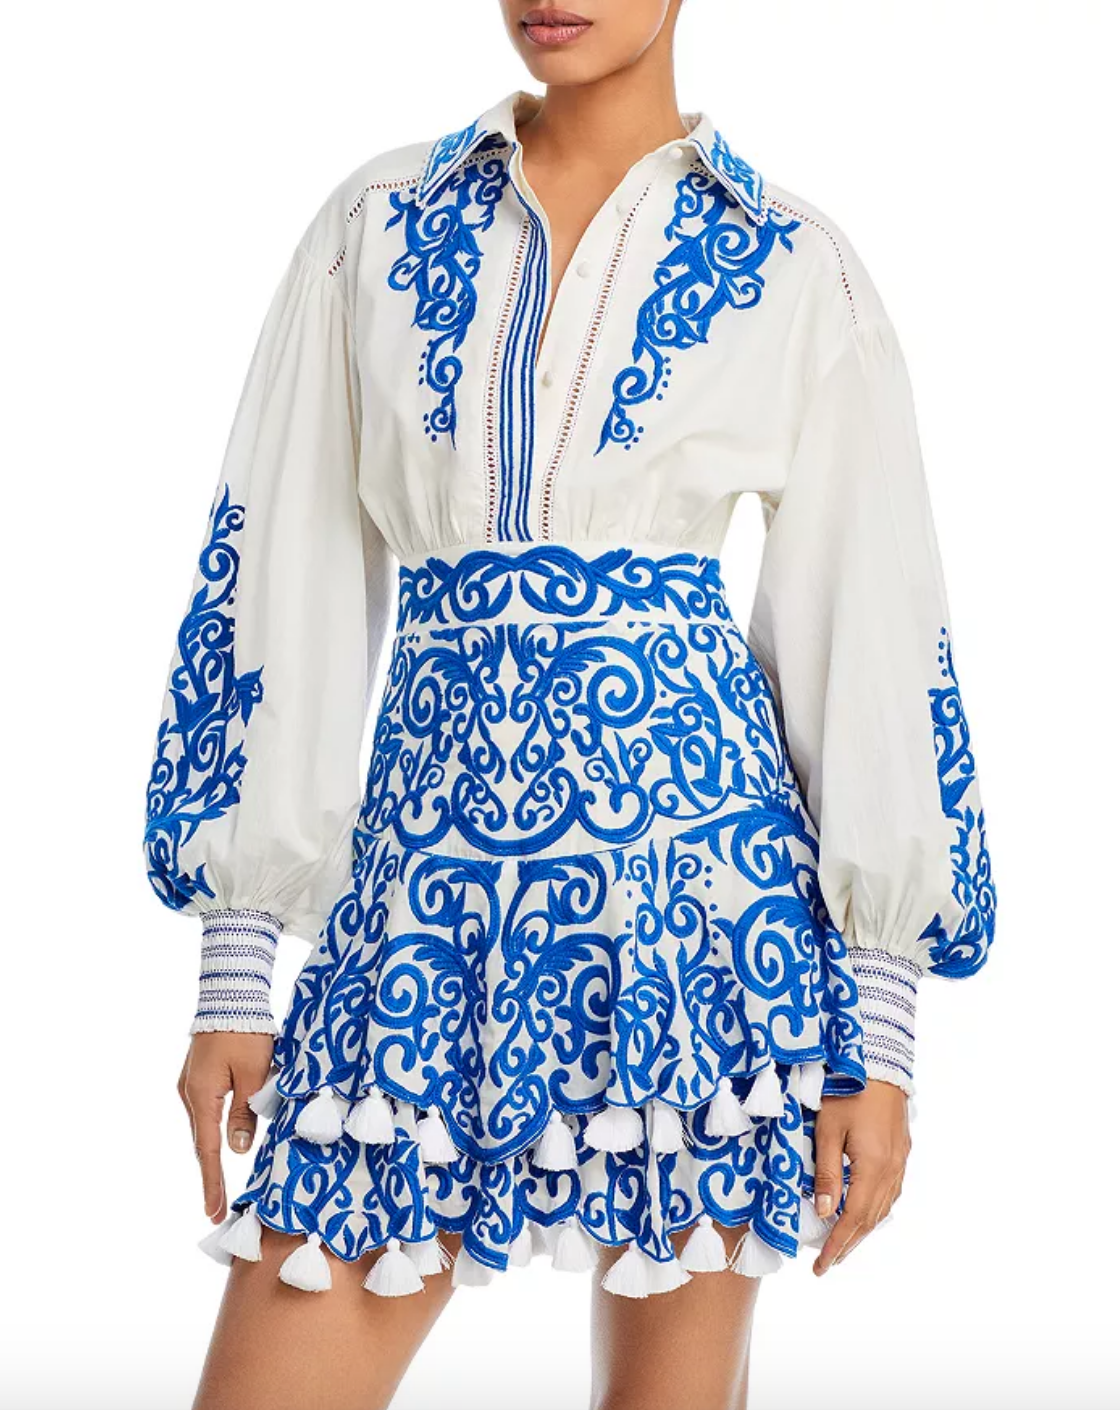 Rachel Fuda's White and Blue Embroidered Shirt Dress